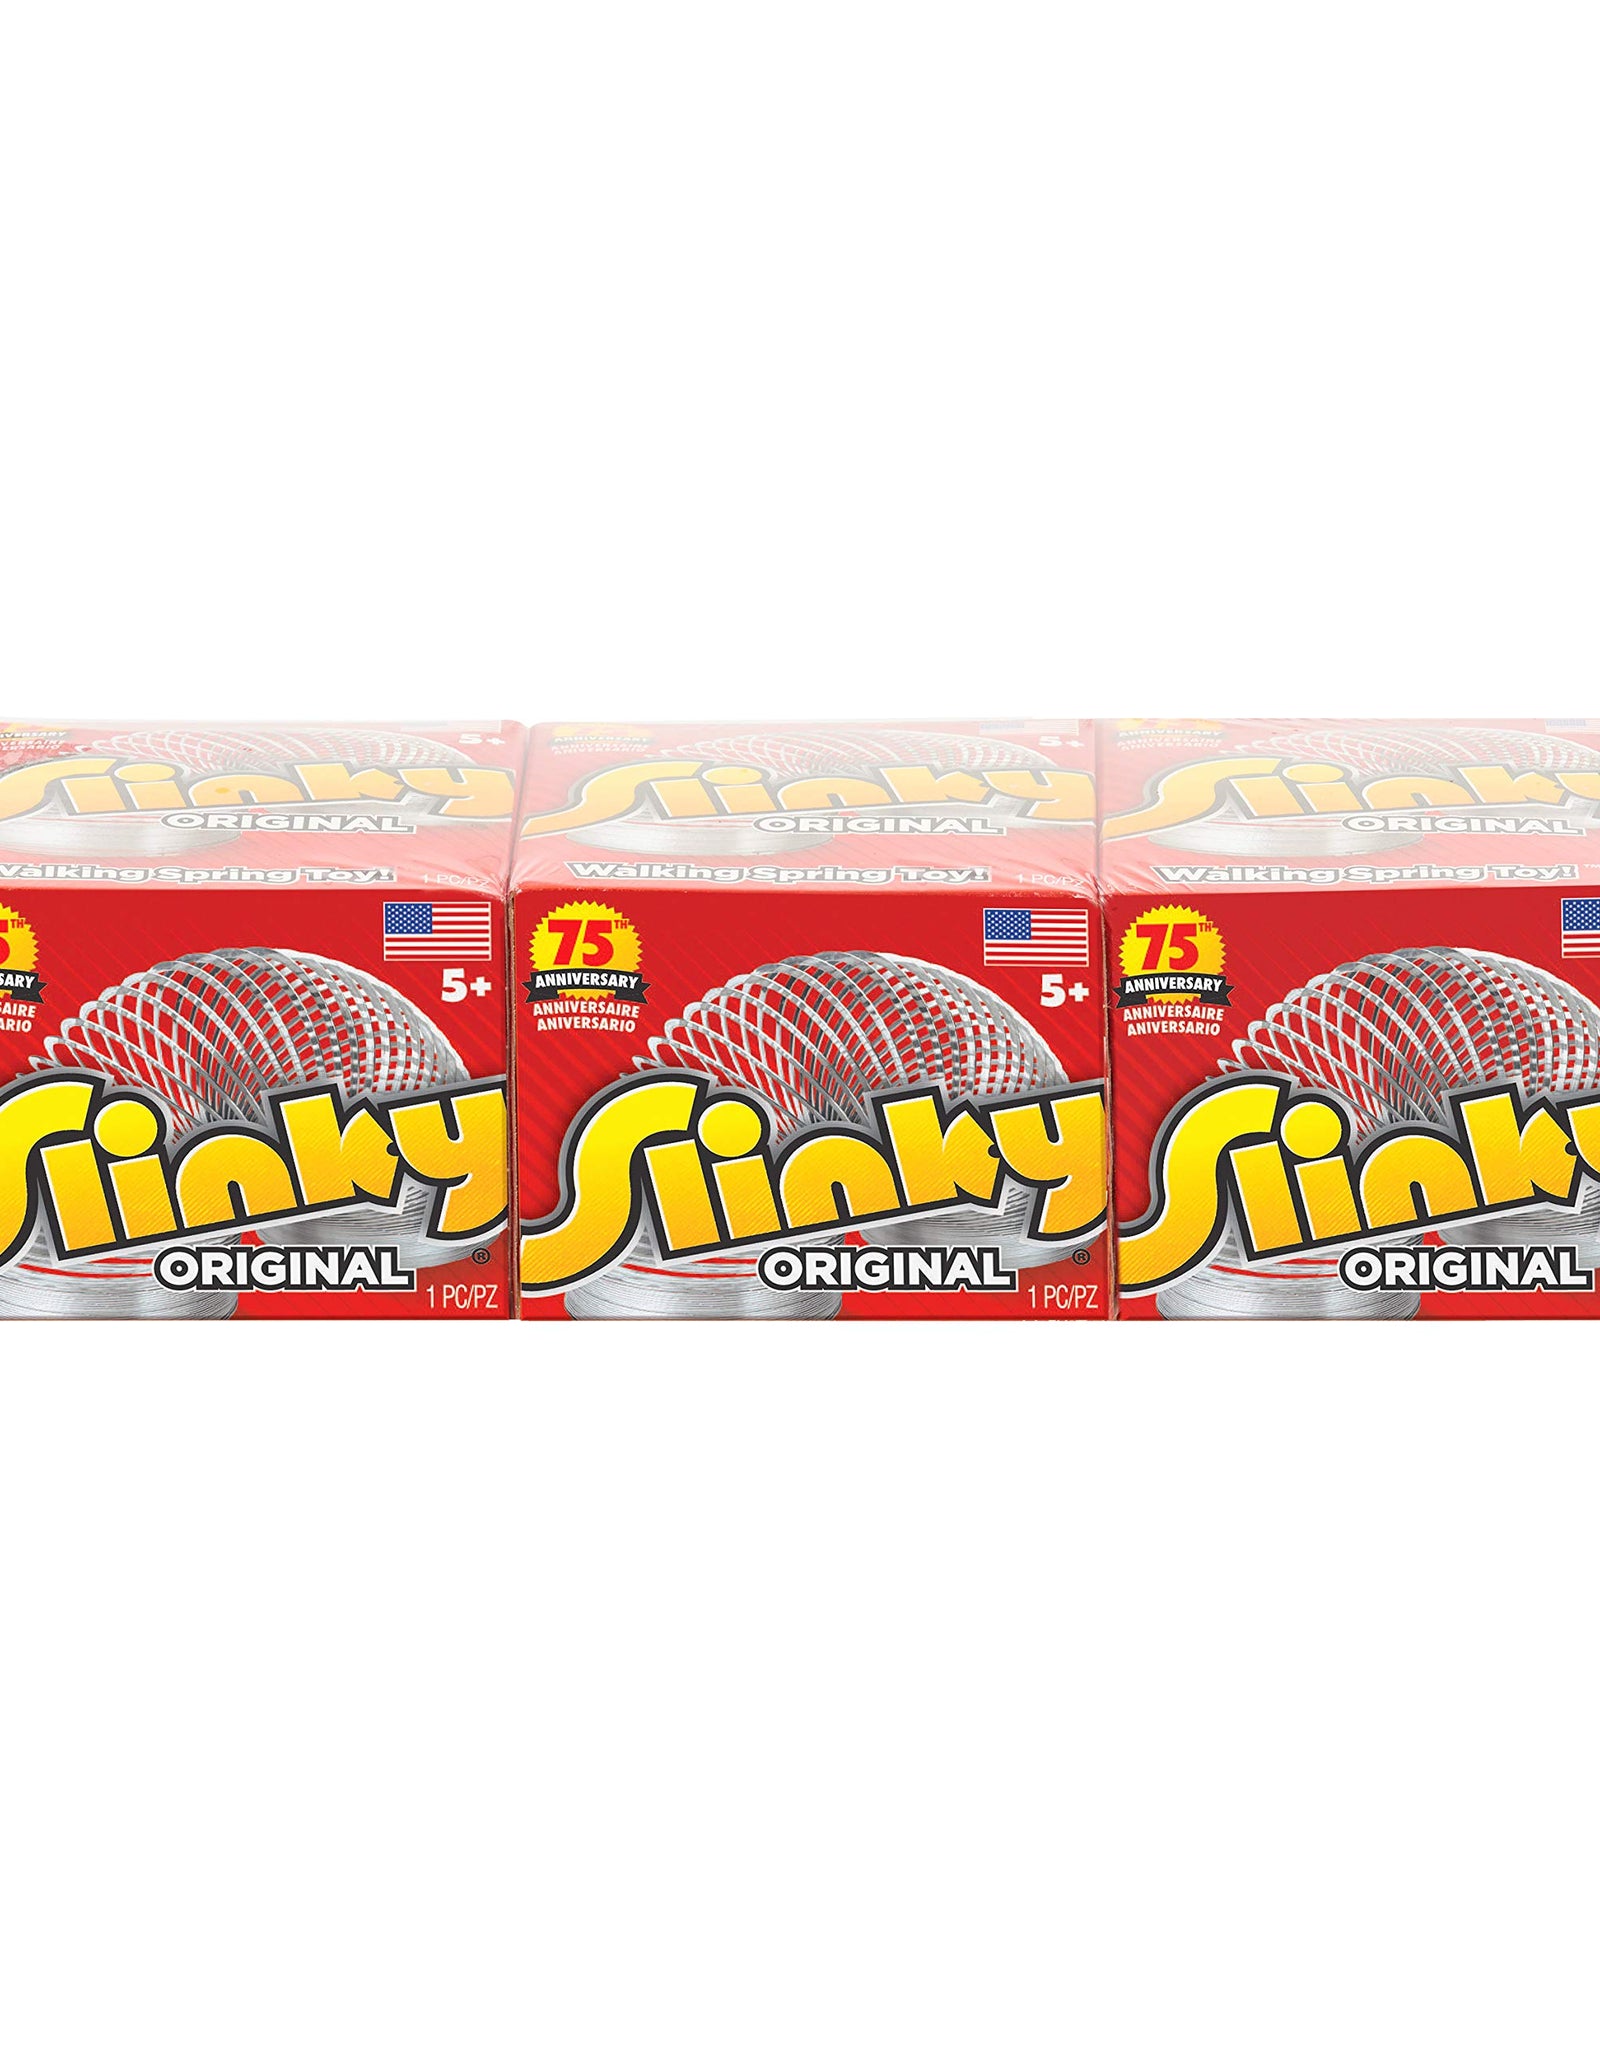 The Original Slinky Walking Spring Toy, 3-Pack Metal Slinky, Fidget Toys, Party Favors and Gifts, Toys for 3 Year Old Girls and Boys, by Just Play